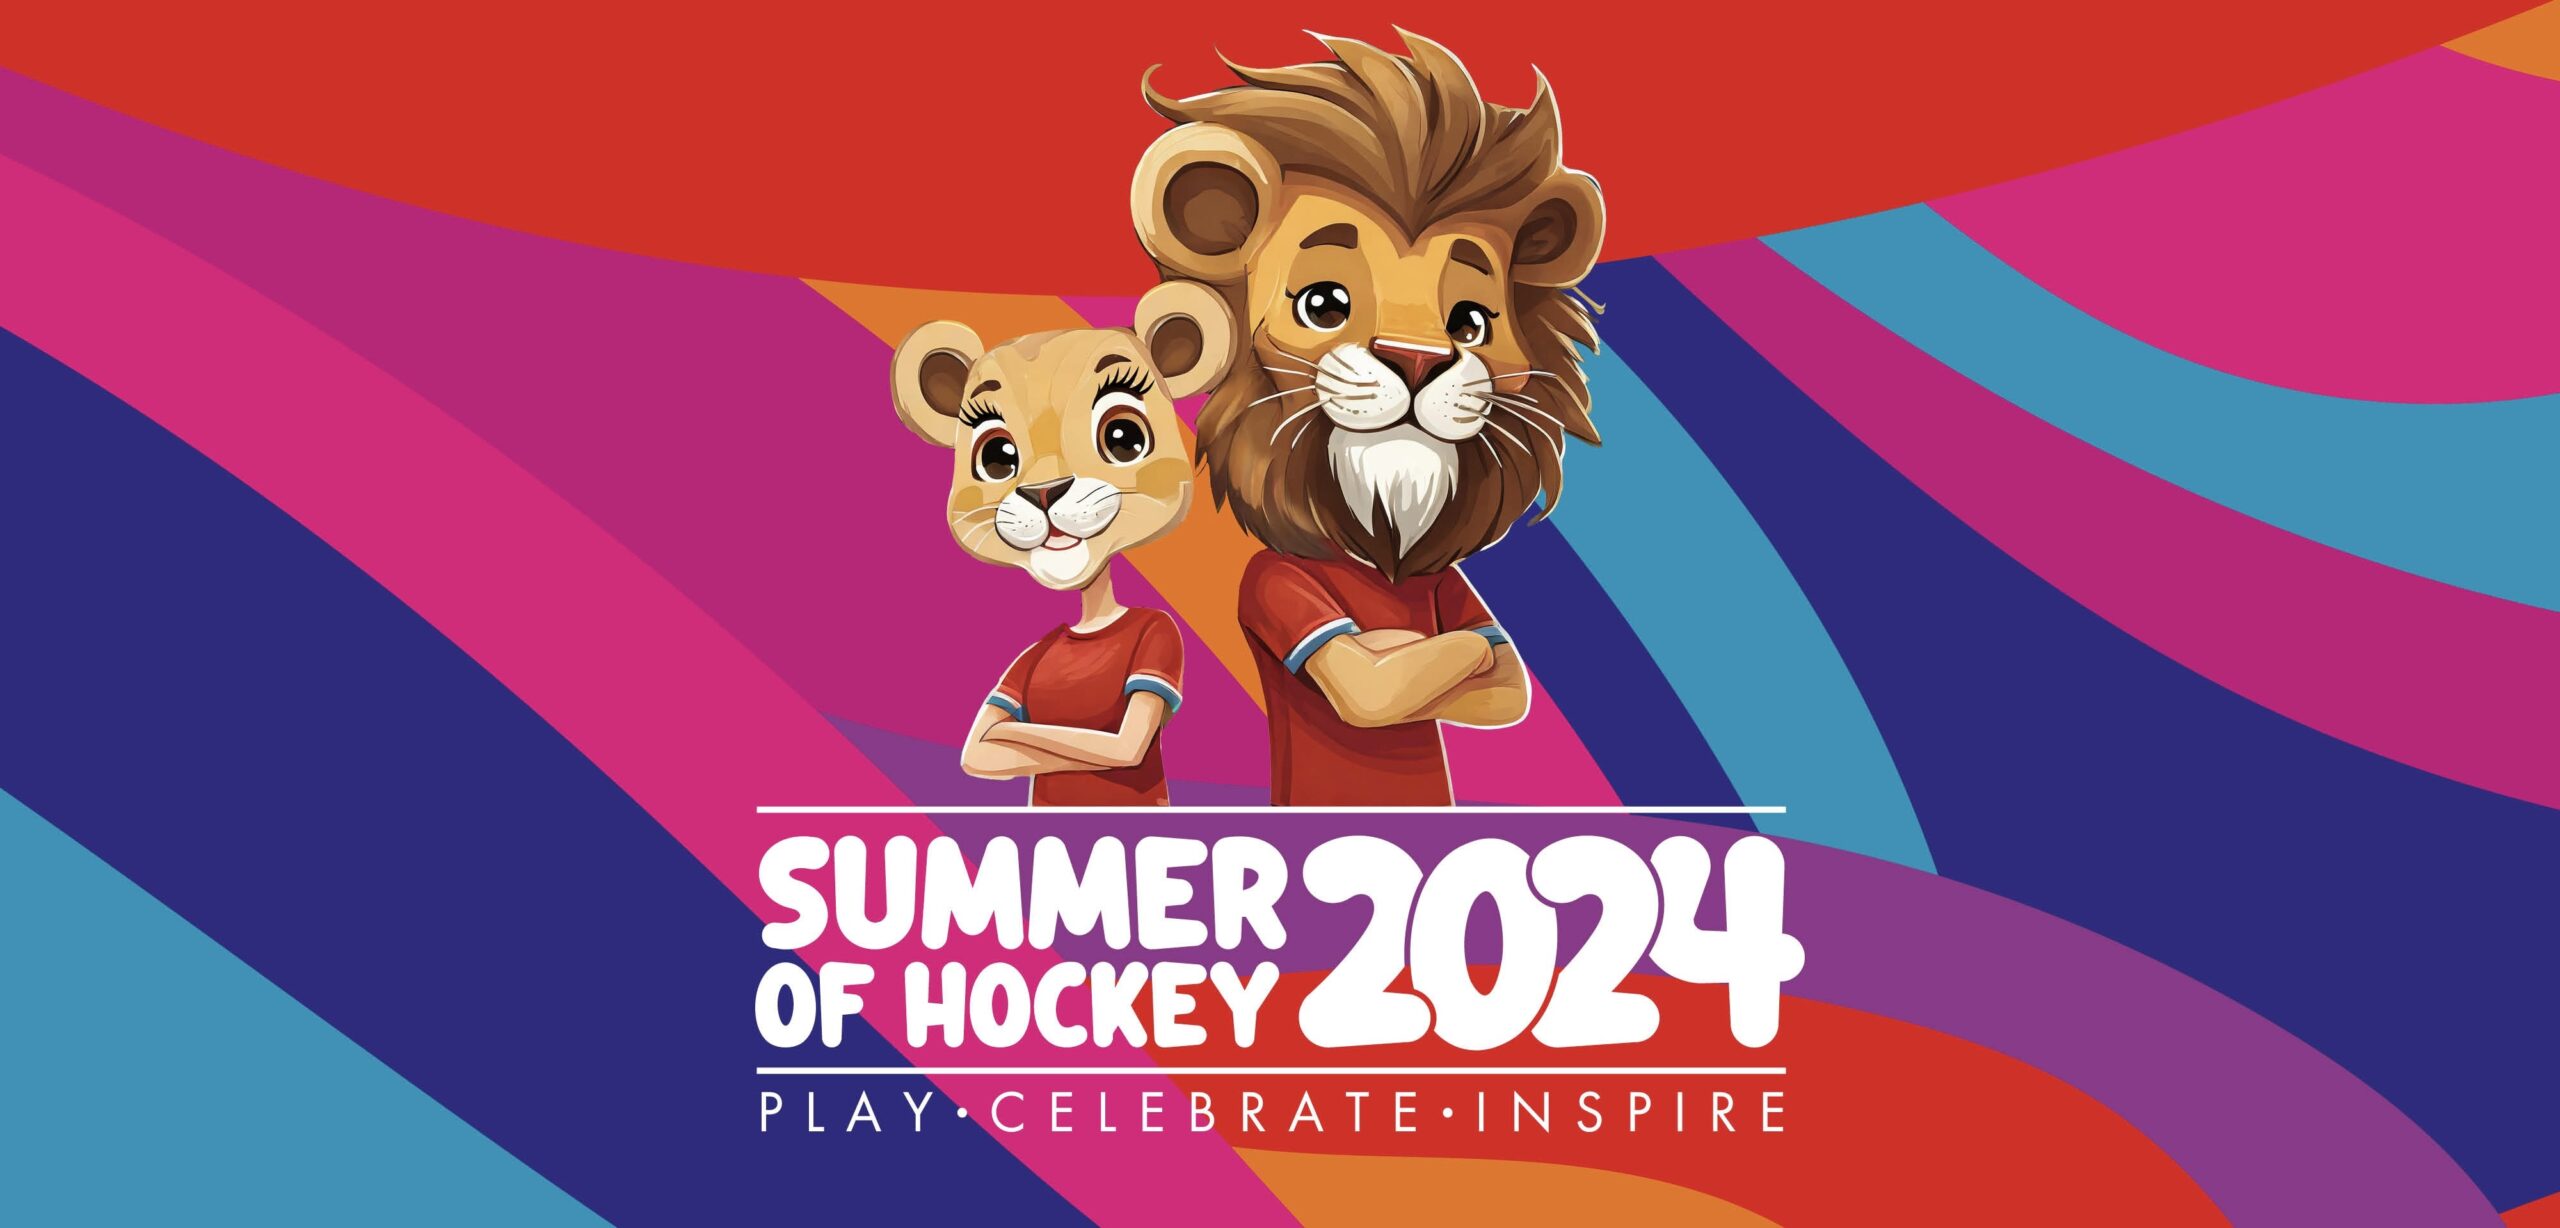 A Summer of Hockey Awaits – Get Your School Involved!